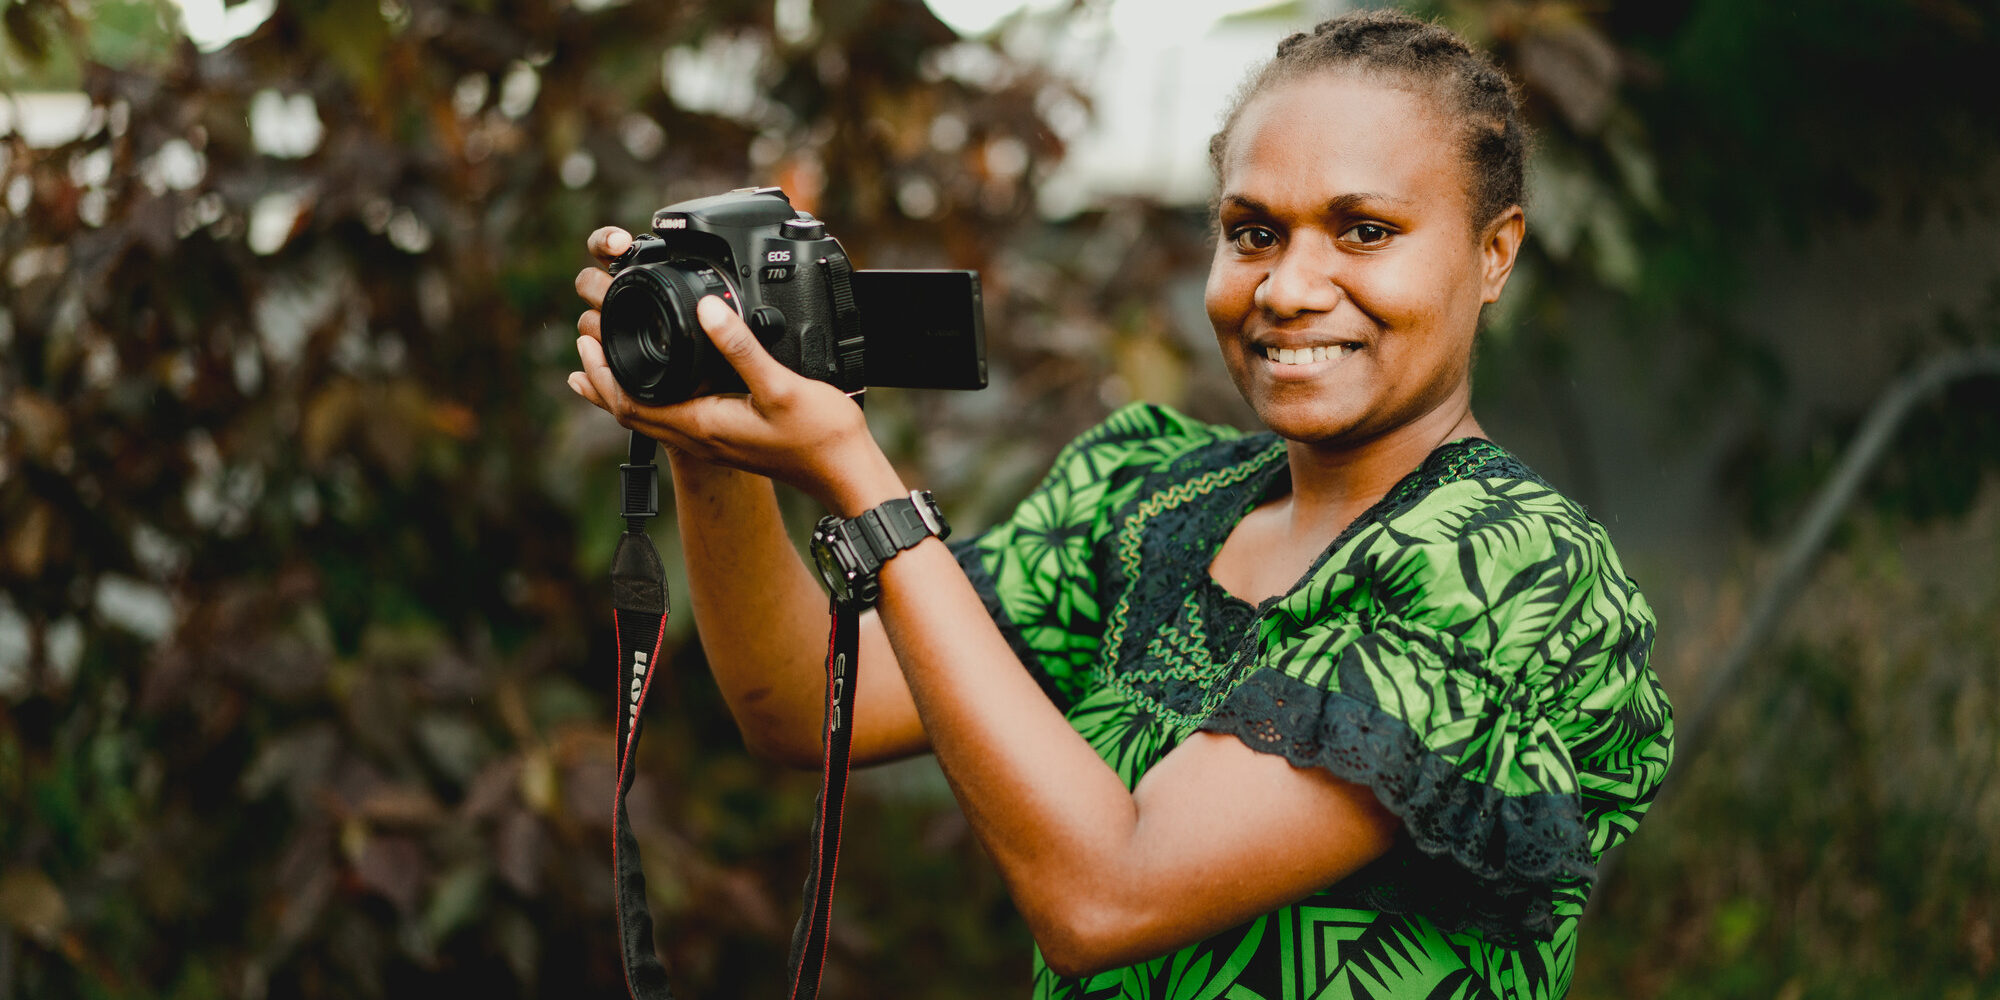 Ann-Ruth has worked with Further Arts, a Vanuatu-based charitable association furthering Vanuatu music, media, dance, and culture. She is currently running her own small business in painting and sewing. Valerie Fernandez/CARE